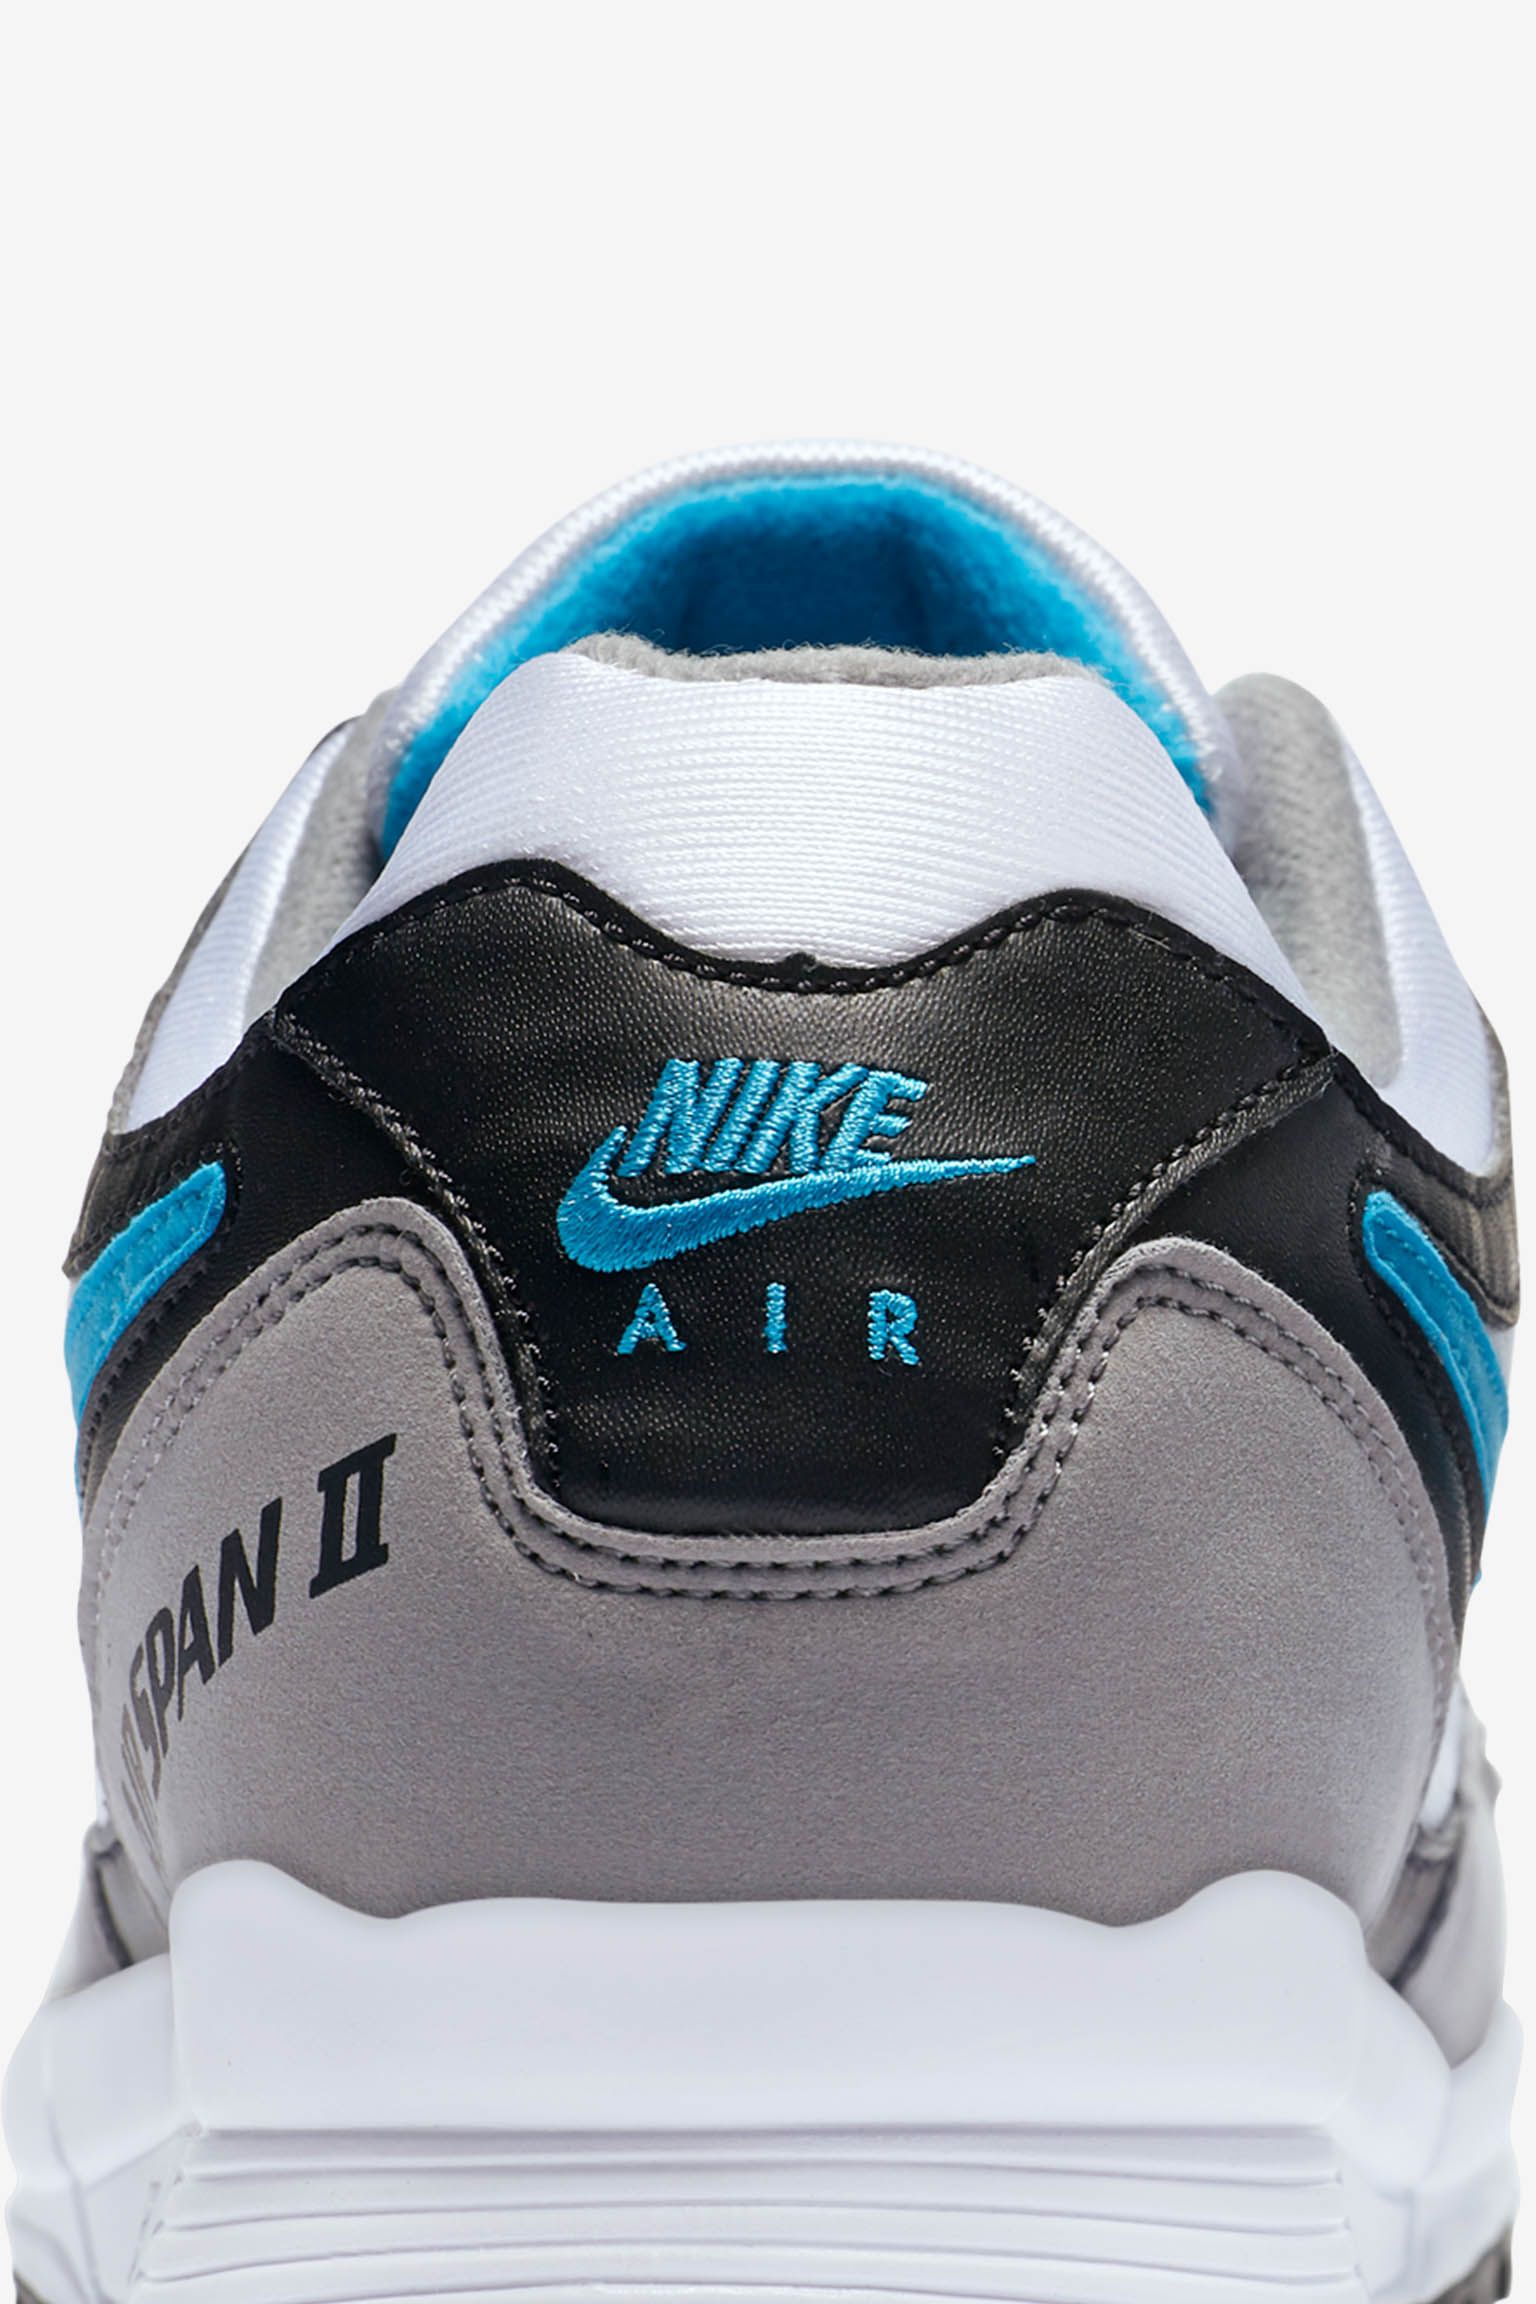 Nike Air Span 2 'Dust &amp; Laser Blue' Release Date. Nike SNKRS